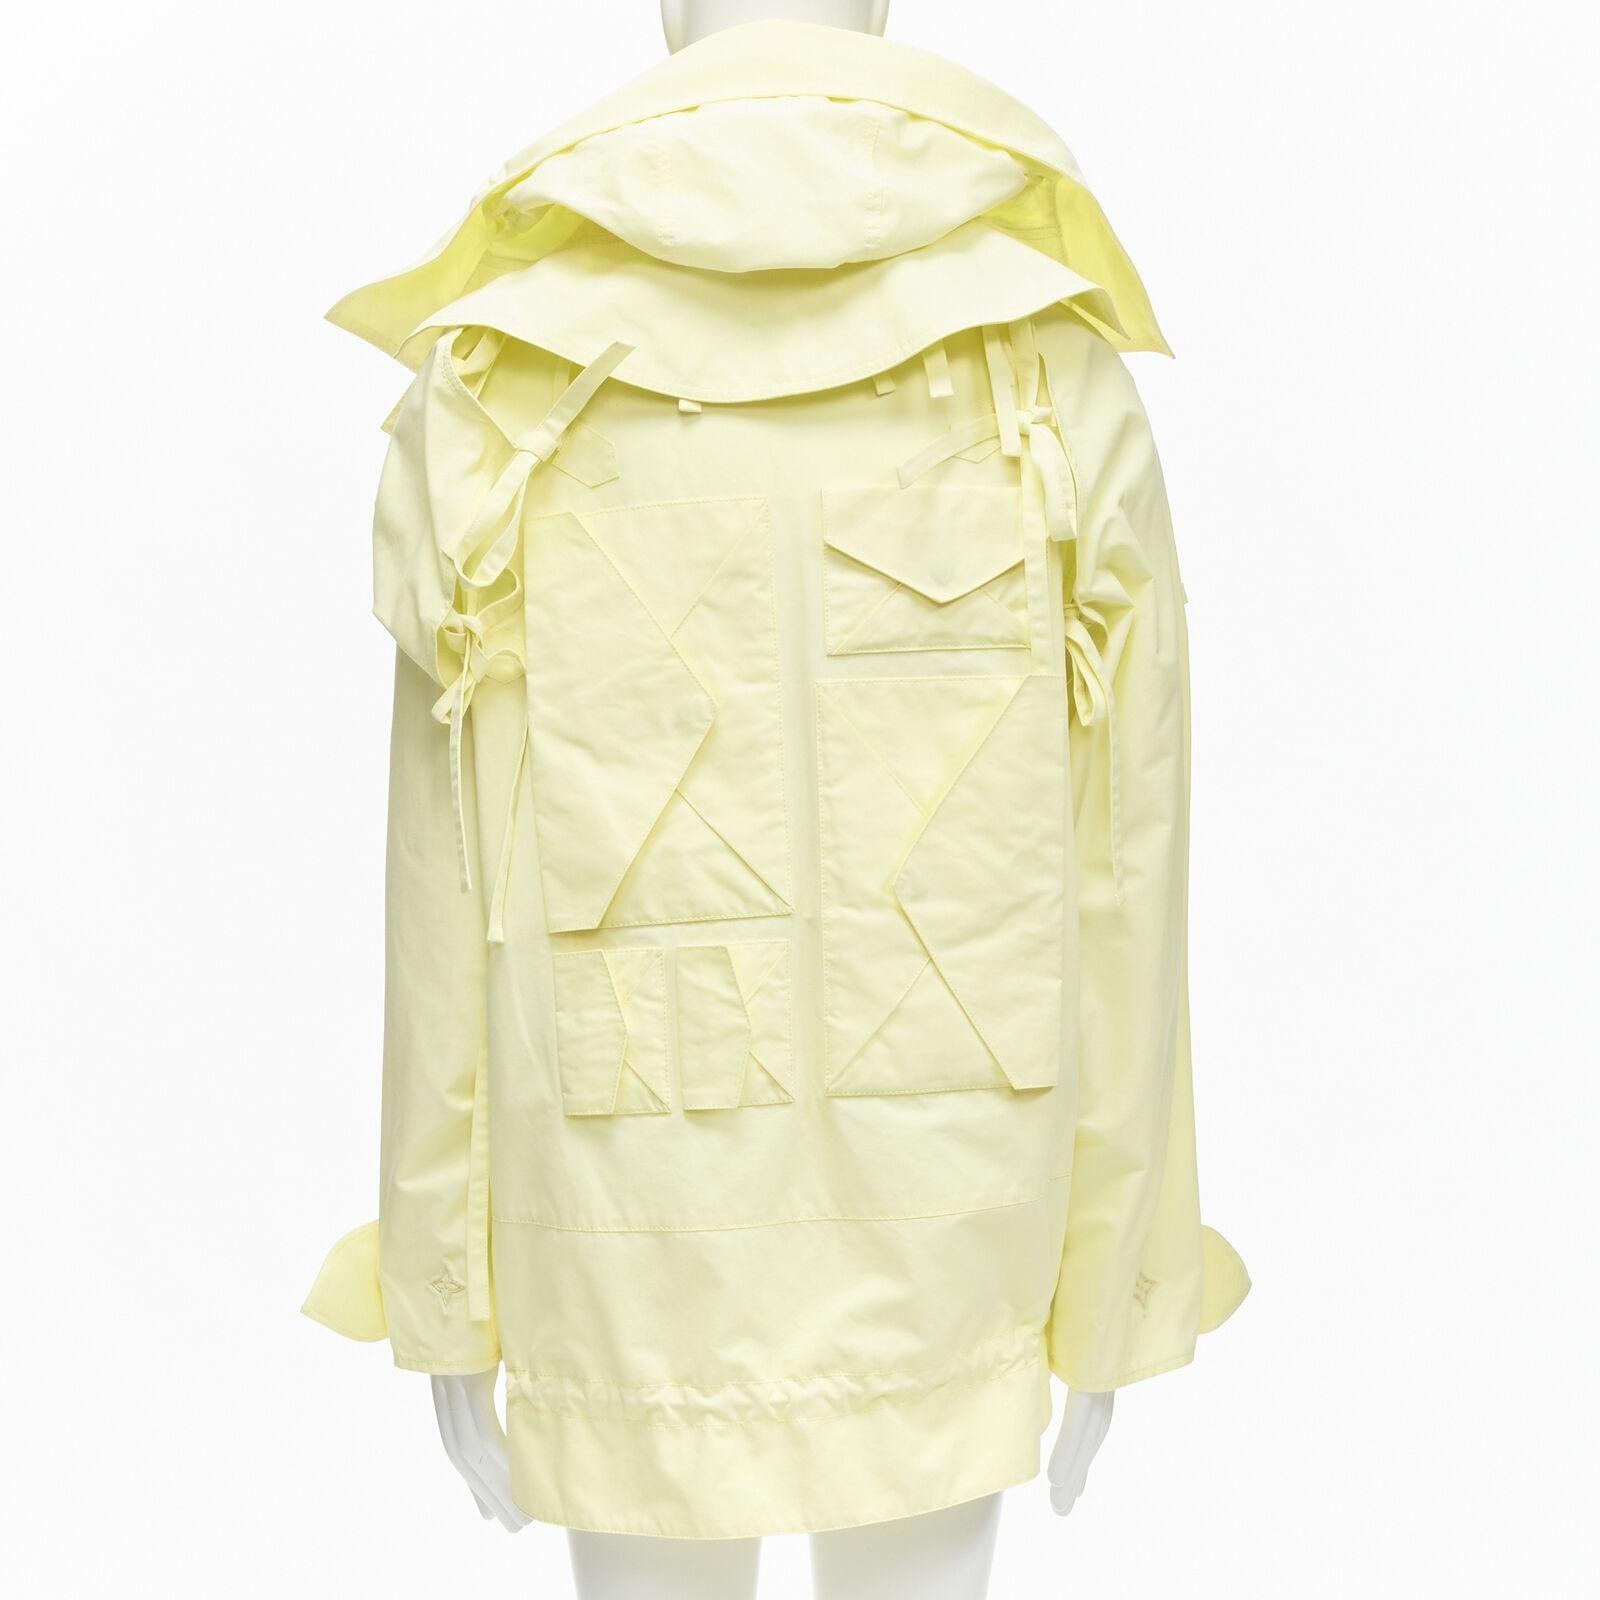 rare LOUIS VUITTON 2020 Runway yellow detachable tie sleeves parka jacket FR46 S
Reference: TGAS/C01496
Brand: Louis Vuitton
Designer: Virgil Abloh
Collection: Spring Summer 2020 - Runway
Material: Cotton, Polyamide
Color: Yellow
Pattern: